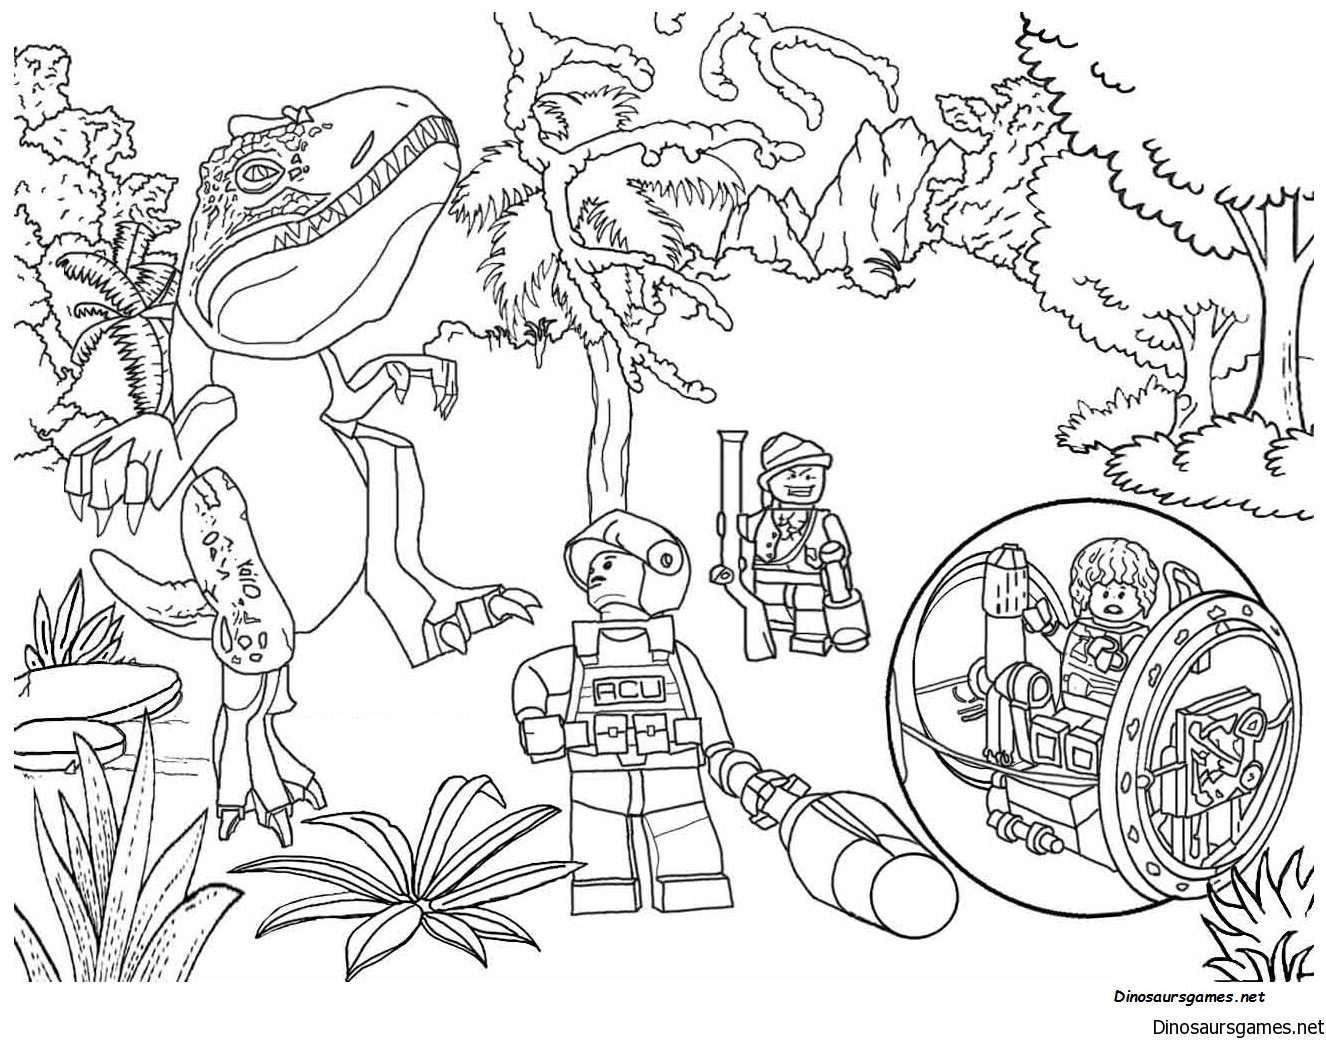 Jurassic Park 5 Coloring Page - Dinosaur Coloring Pages